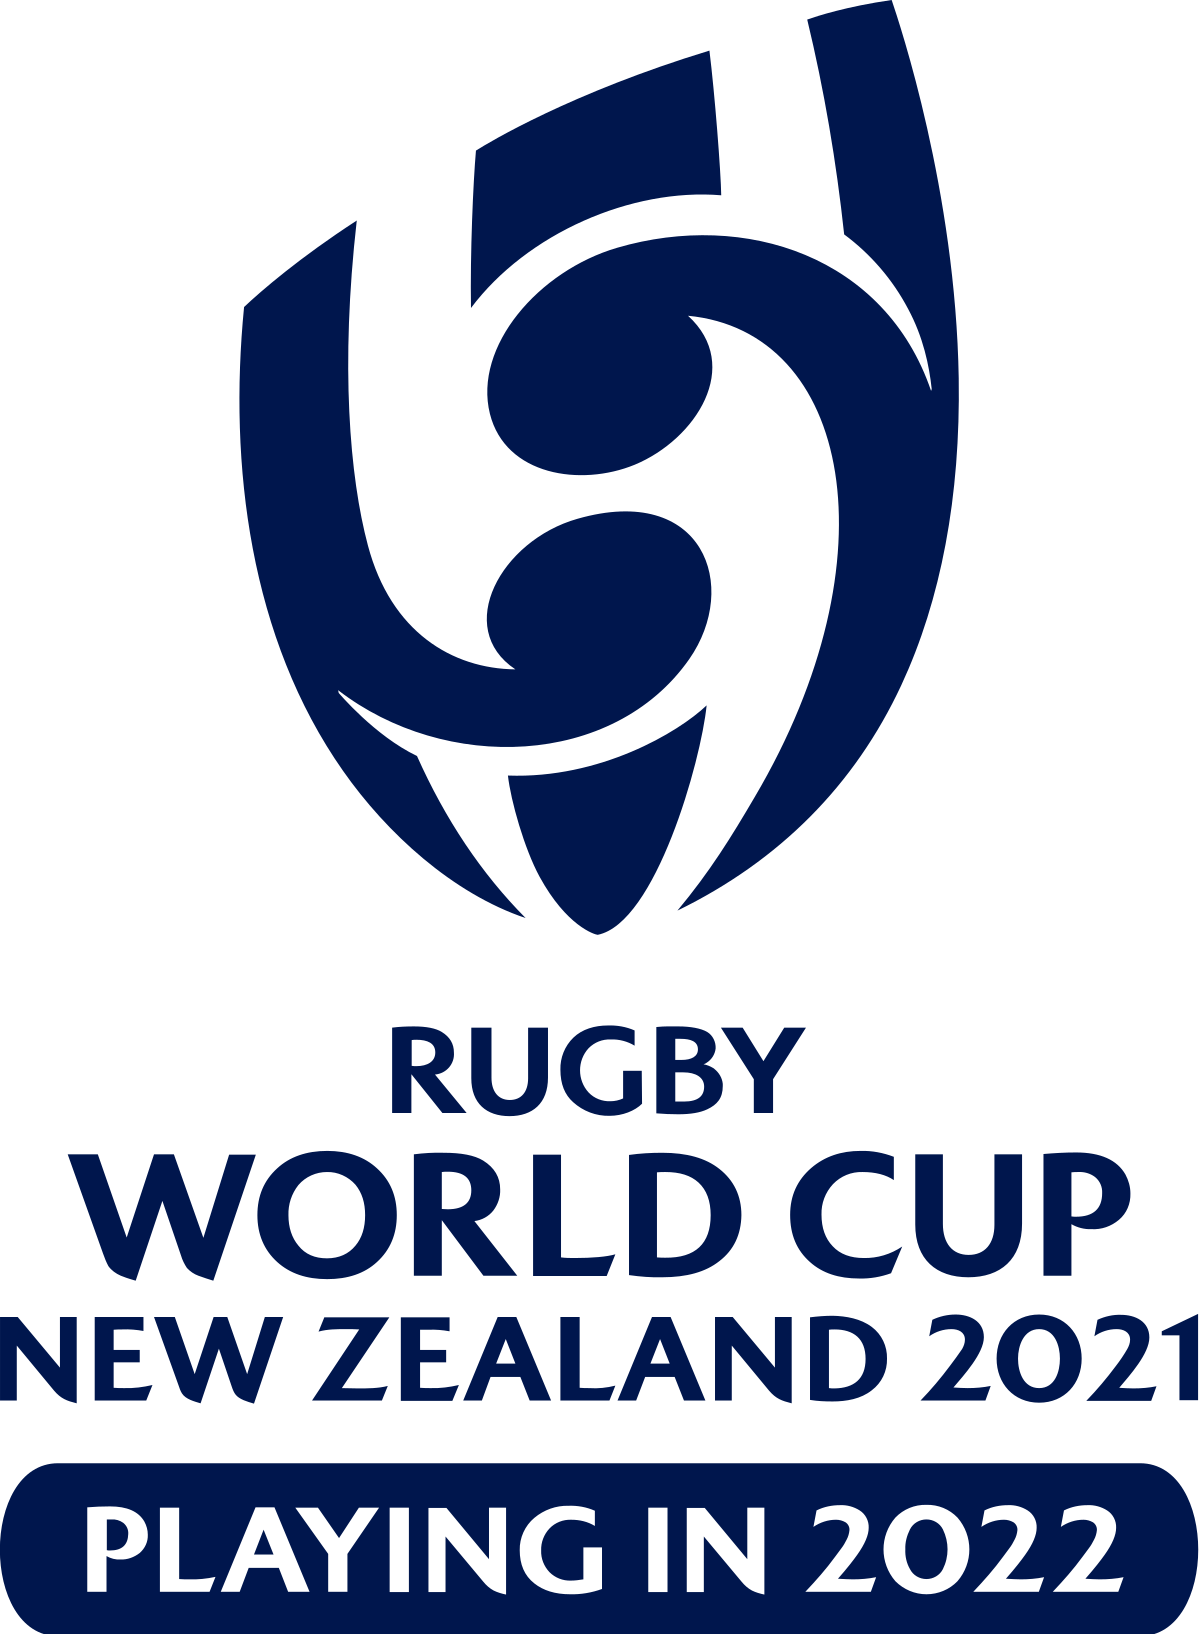 PEACOCK TO PRESENT LIVE COVERAGE OF WOMENS RUGBY WORLD CUP BEGINNING THIS WEEK FROM NEW ZEALAND